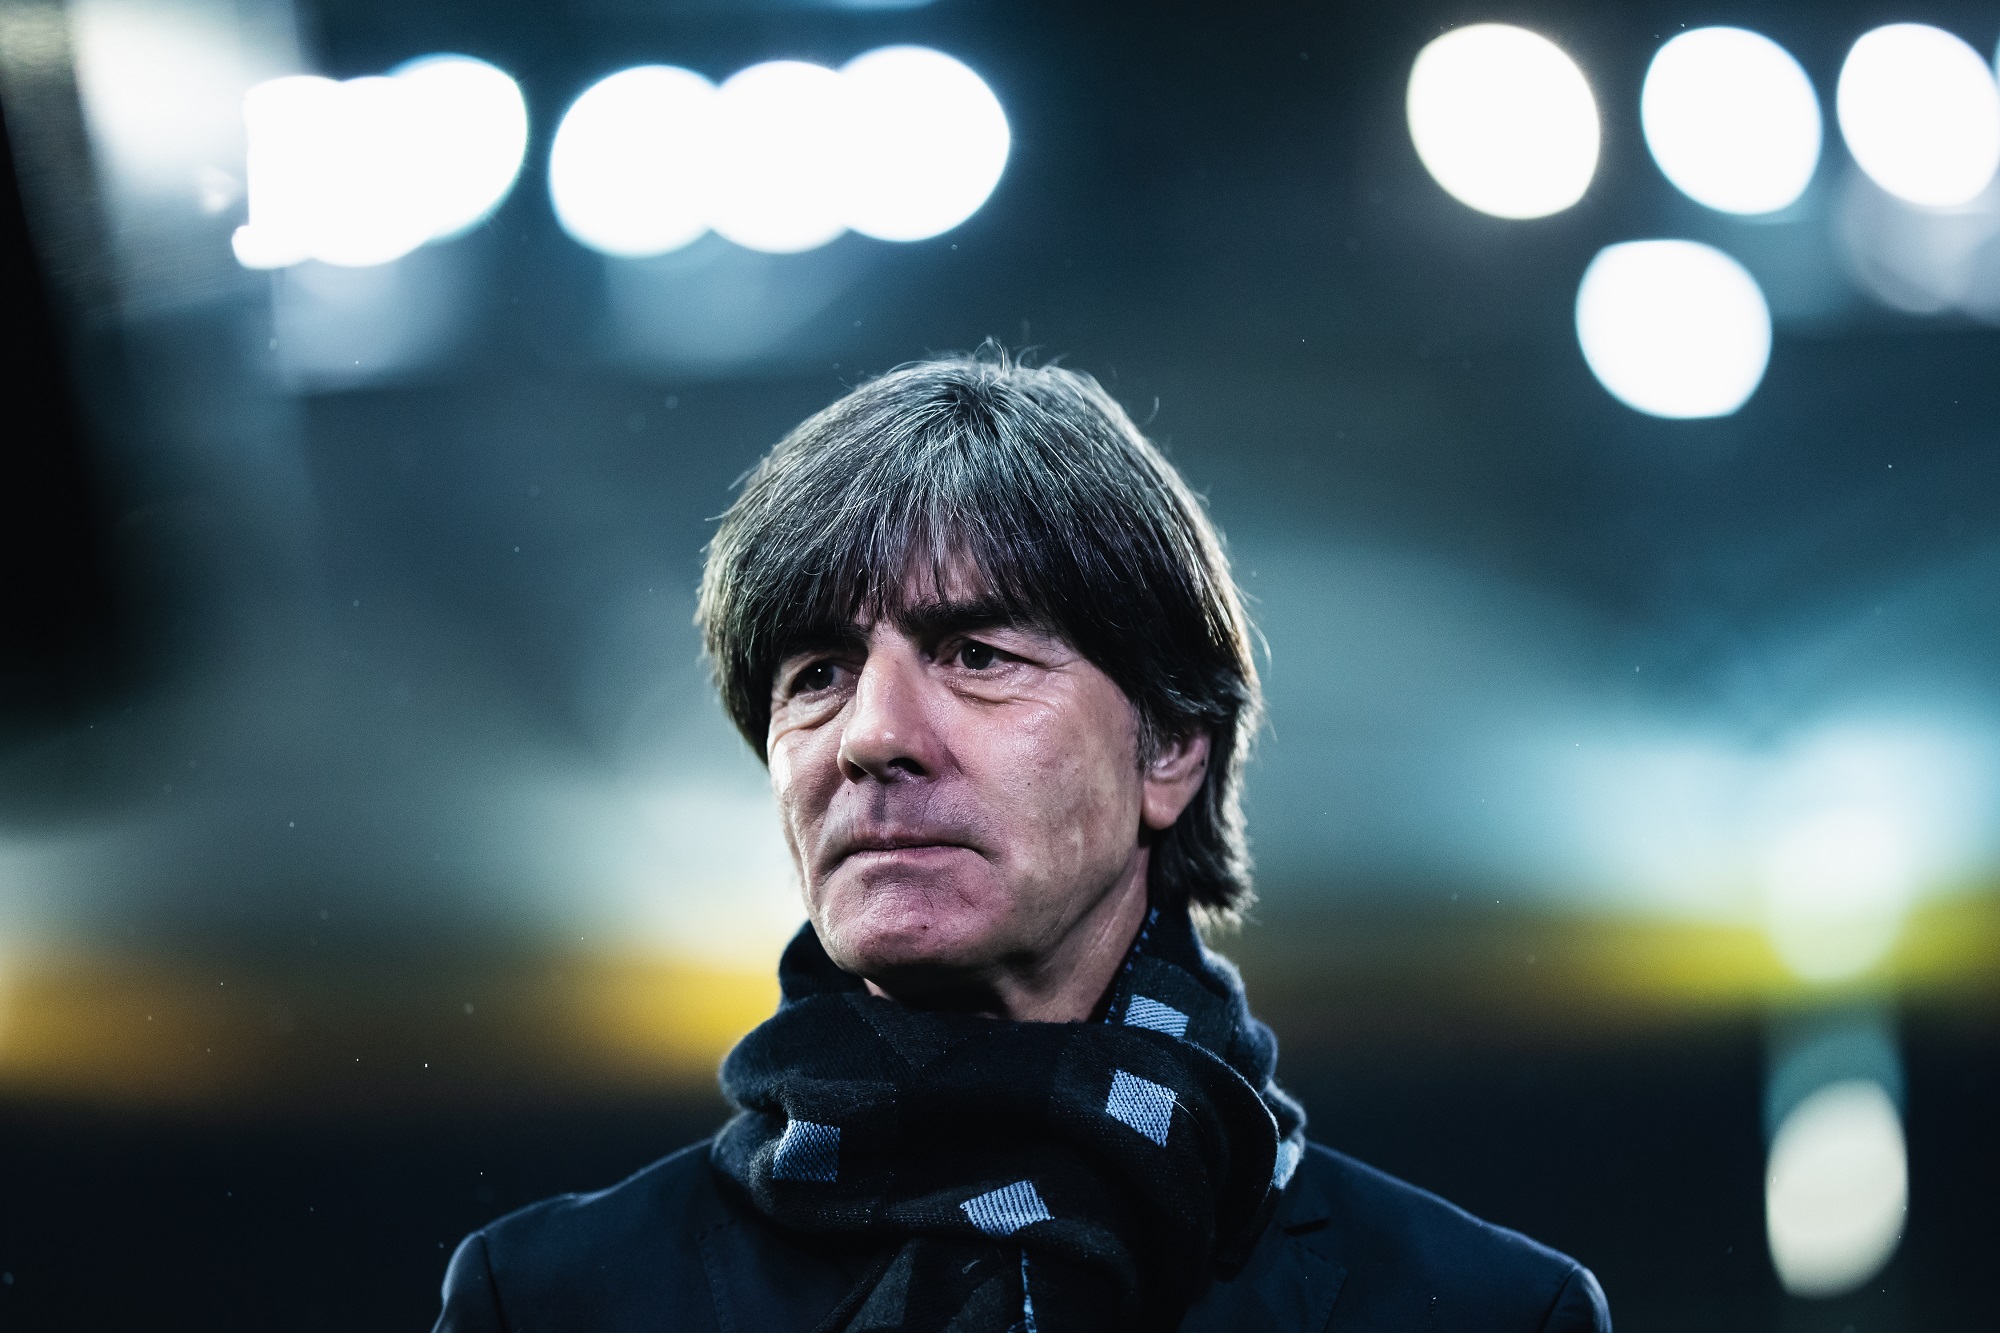 FRANKFURT AM MAIN, GERMANY - NOVEMBER 19: (EDITORS NOTE: Image has been digitally enhanced.) Head coach Joachim Loew of Germany looks on prior to the UEFA Euro 2020 Qualifier between Germany and Northern Ireland at Commerzbank Arena on November 19, 2019 in Frankfurt am Main, Germany. (Photo by Simon Hofmann/Bongarts/Getty Images)